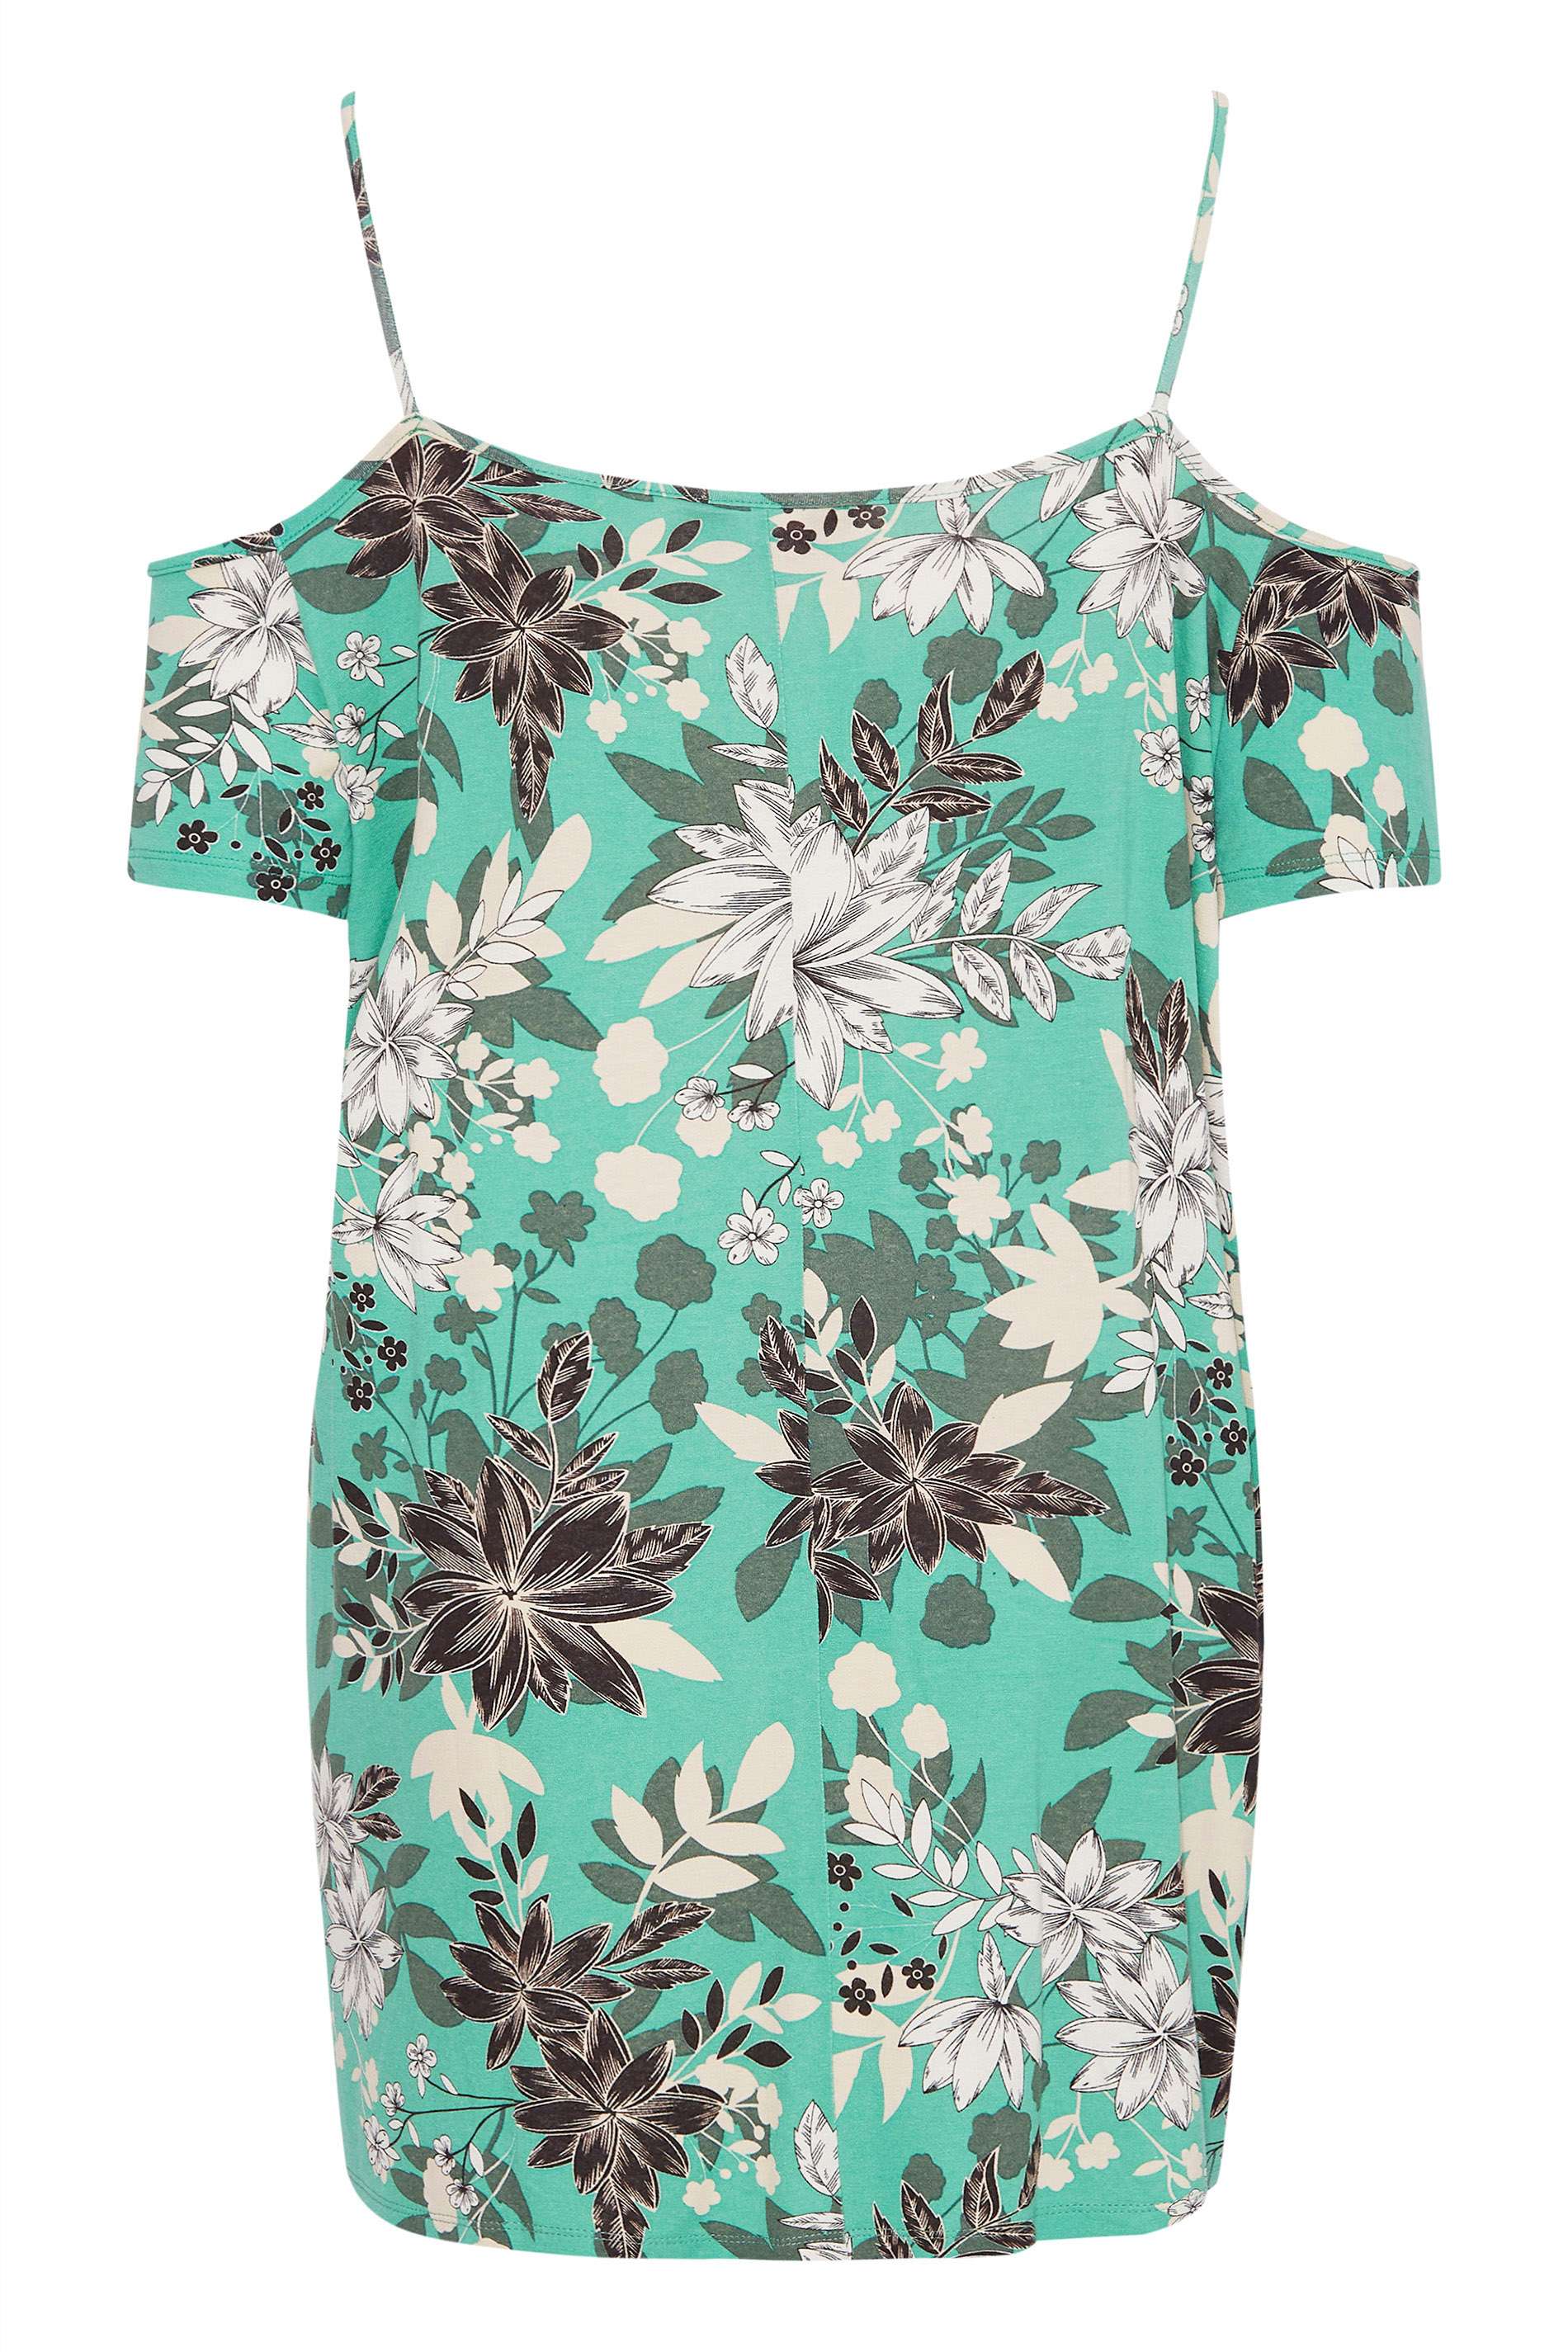 Grande taille  Tops Grande taille  Tops Épaules Ajourées & Style Bardot | Top Vert Tropical Floral Style Bardot - FD19314